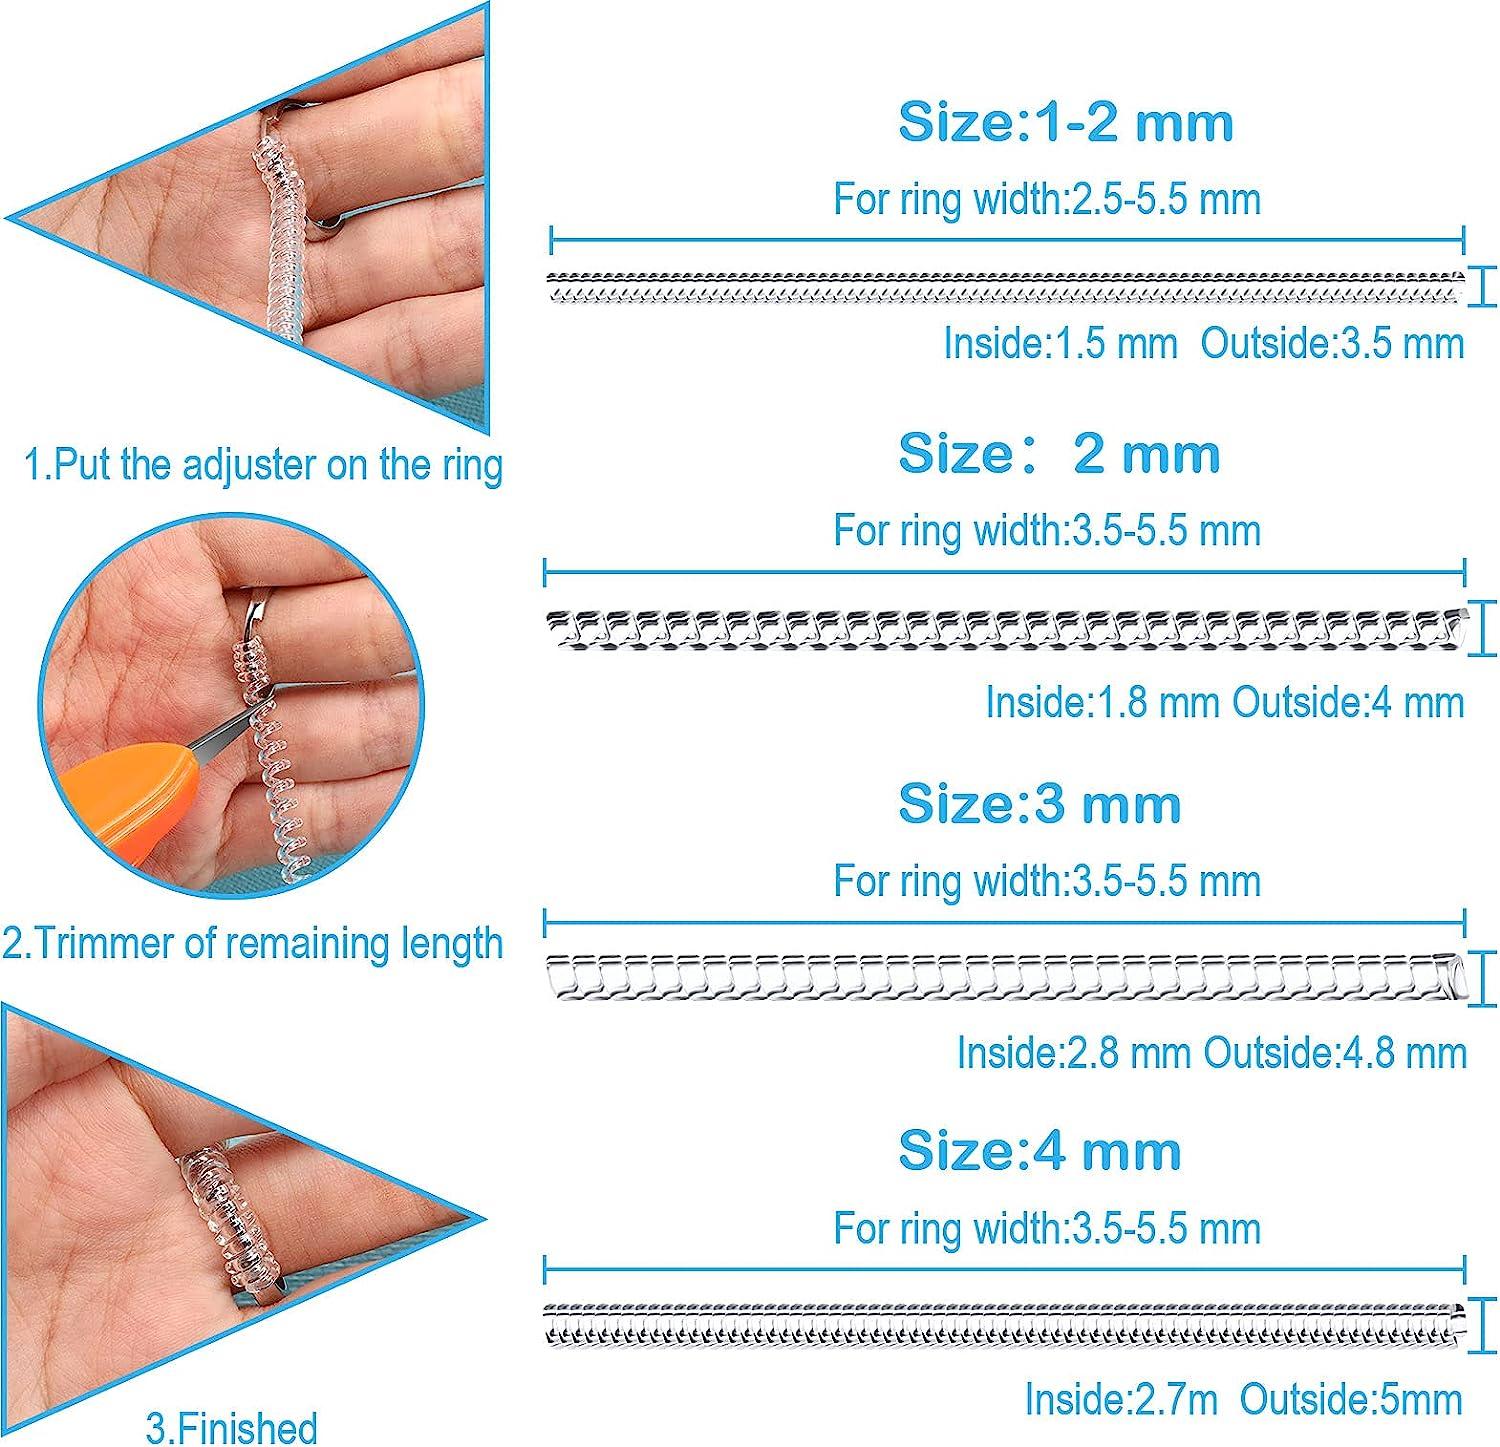 8 Sizes Silicone Invisible Clear Ring Size Adjuster Resizer Loose Rings  Reducer Ring Sizer Fit Any Rings Jewelry Tools